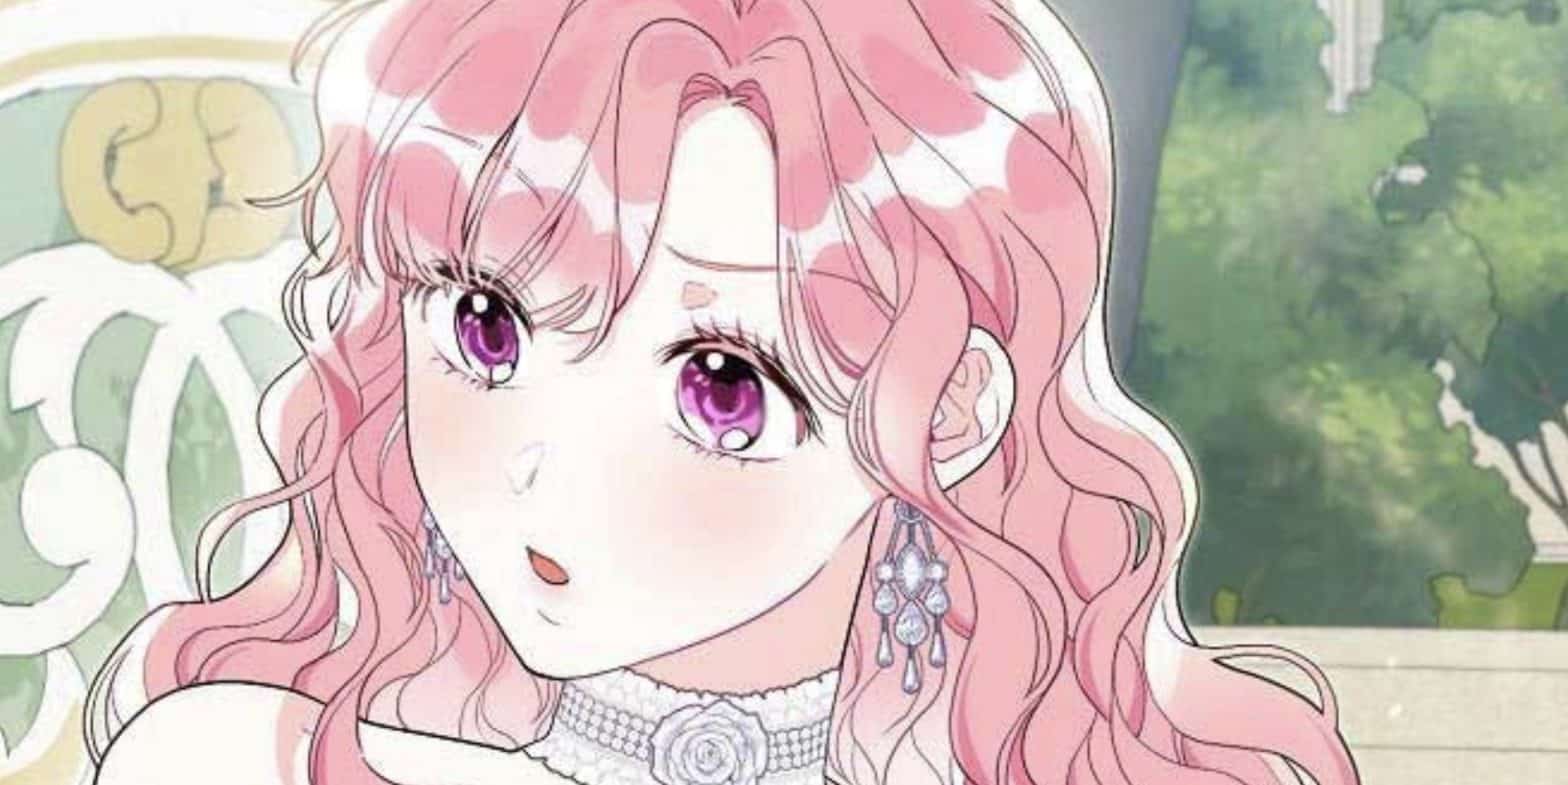 the villain’s daughter-in-law has limited time chapter 70 release date